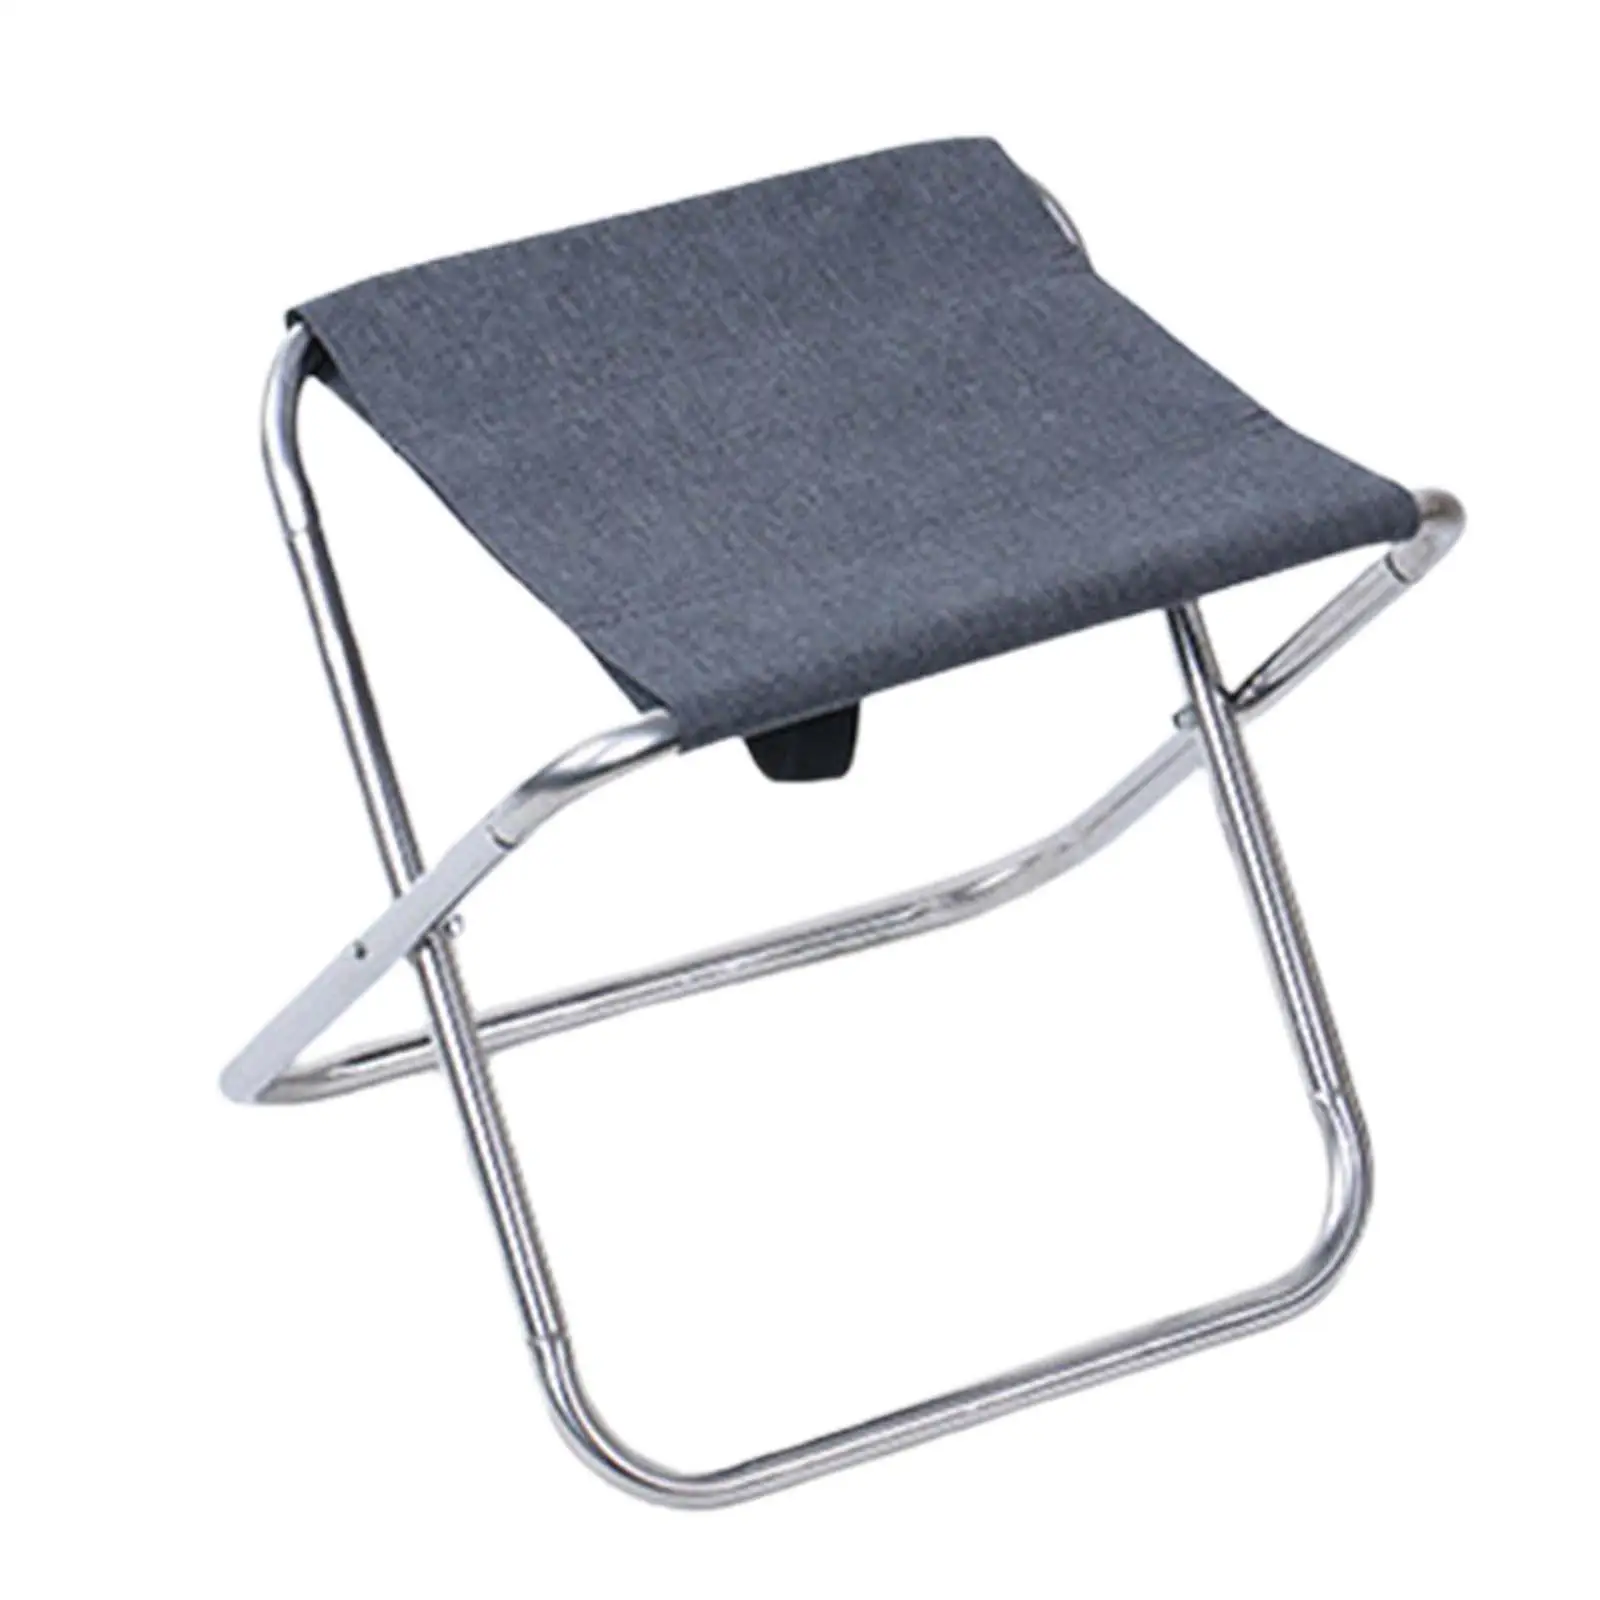 Folding Stool Camping Ultralight Reusable Easy to Carry Camp Stool Fishing Chair for Fishing Garden Backpacking Barbecue Picnic